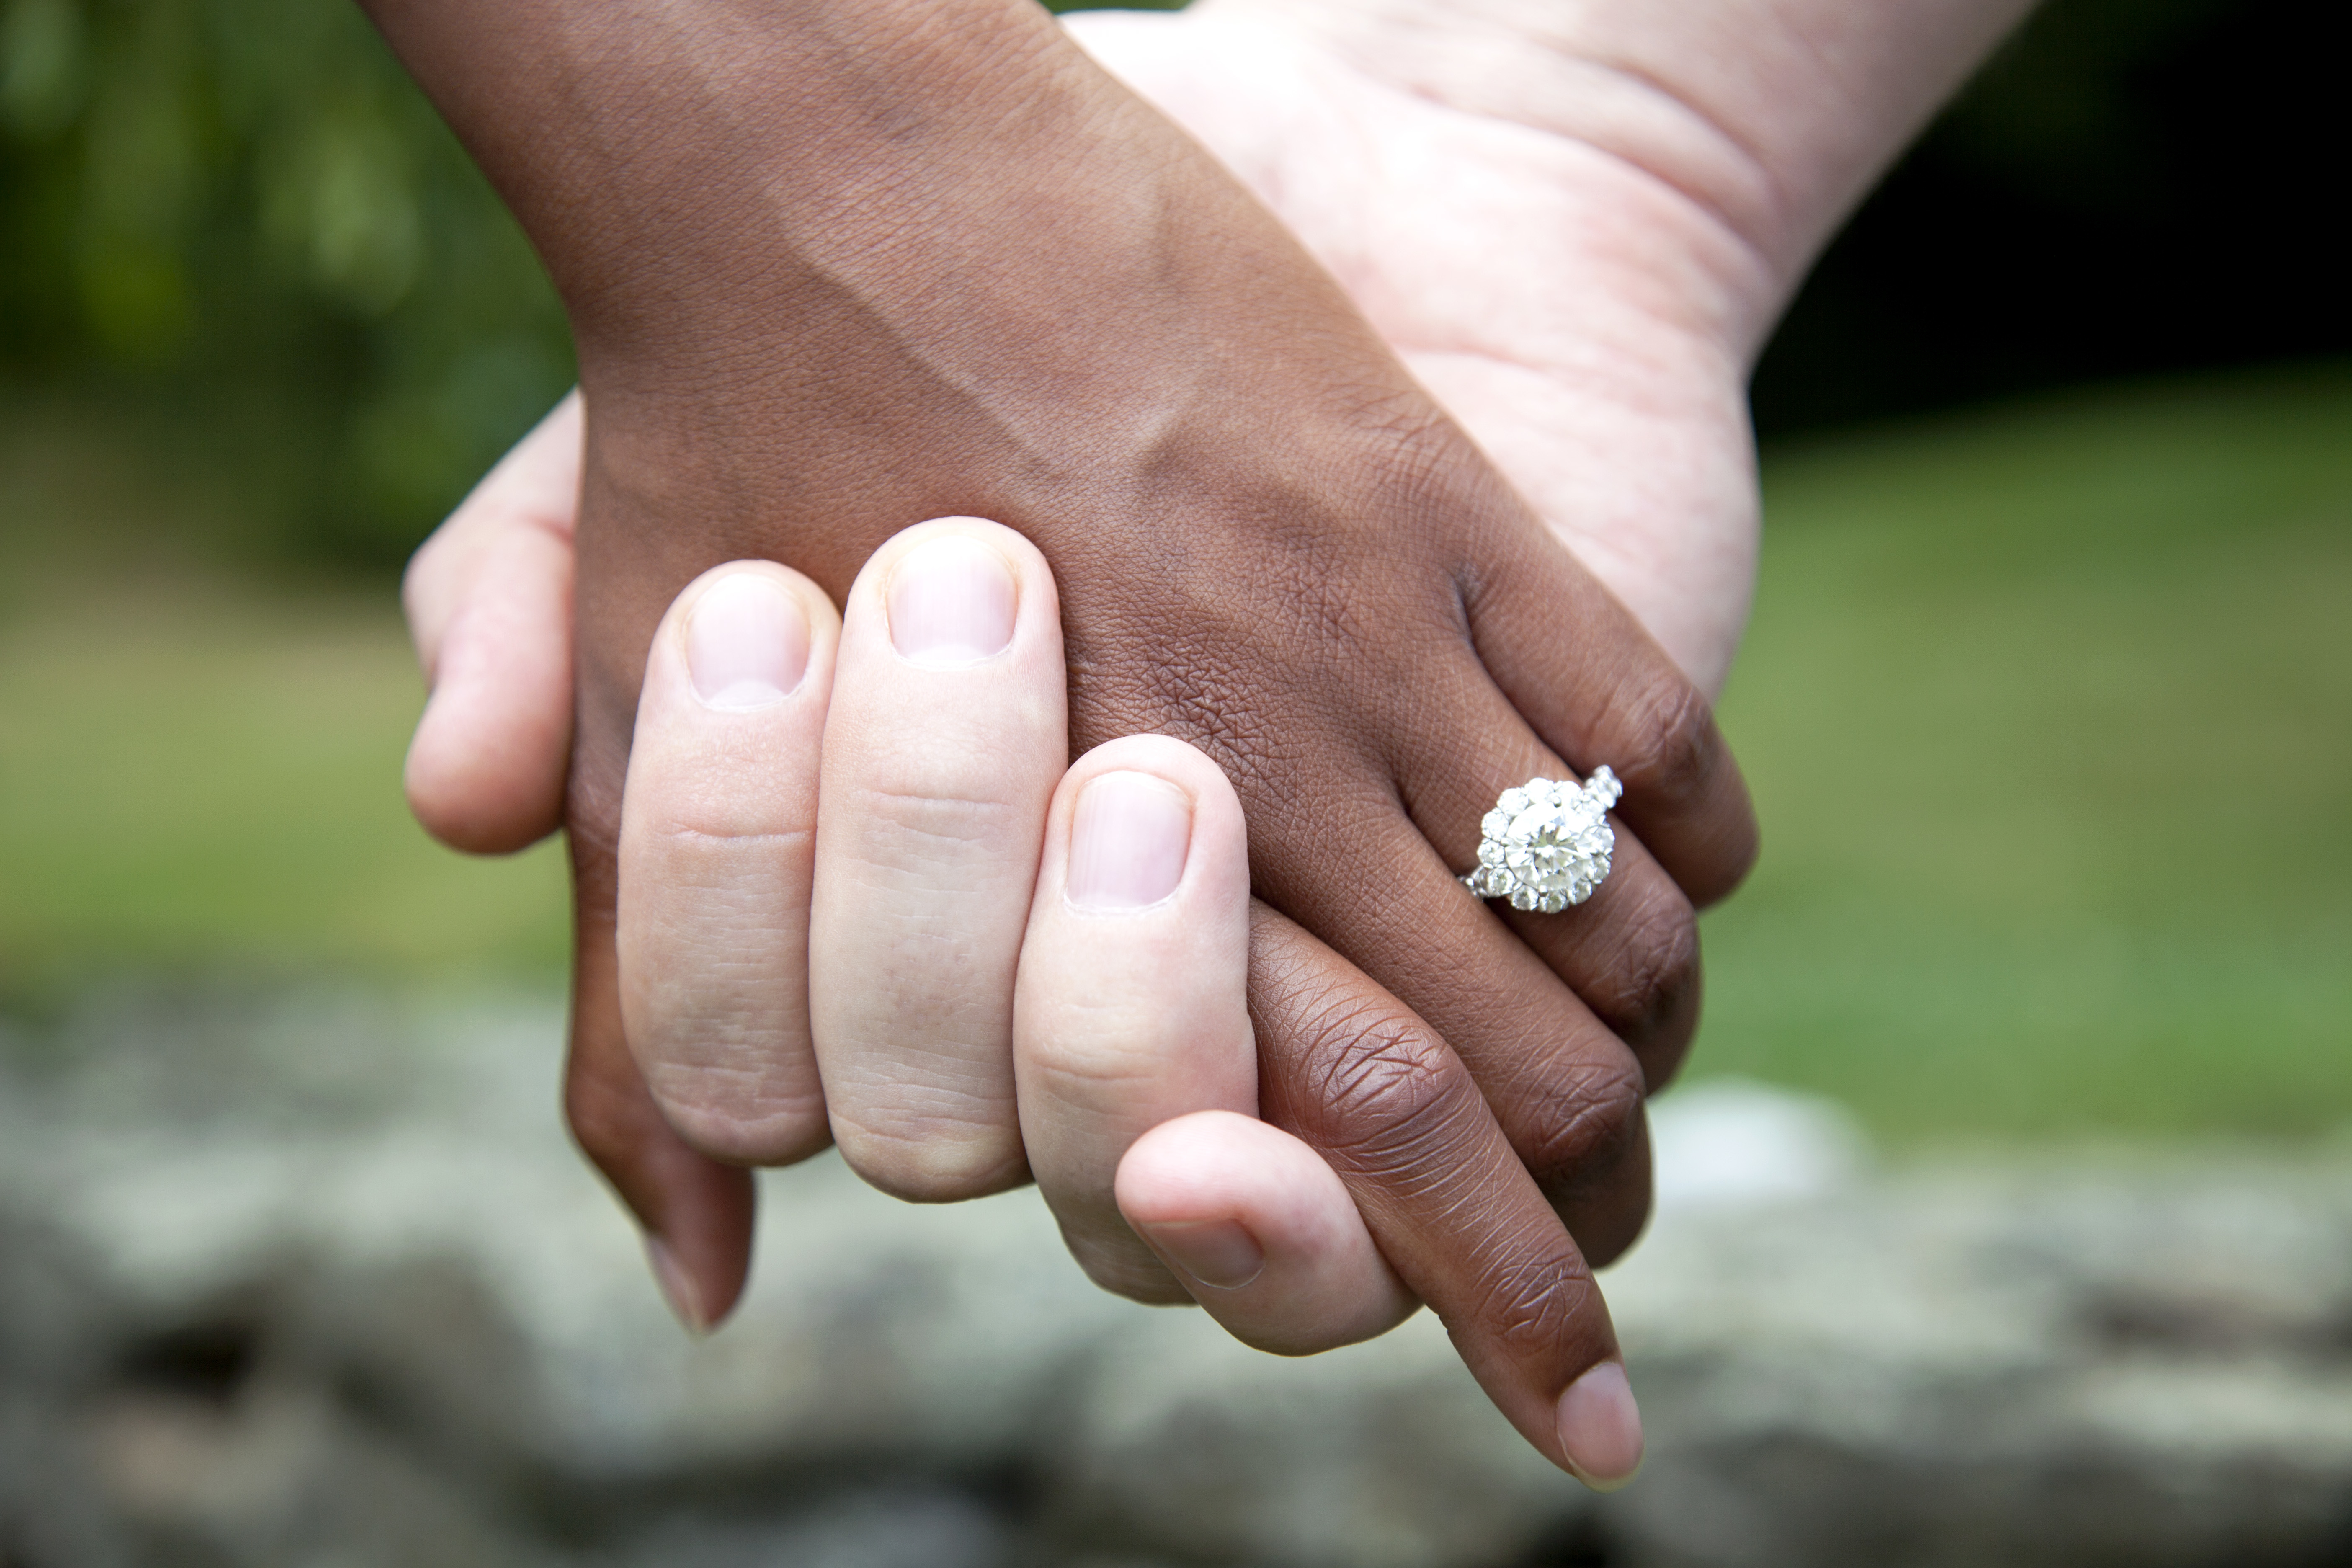 An interracial couple holding hands | Source: Getty Images